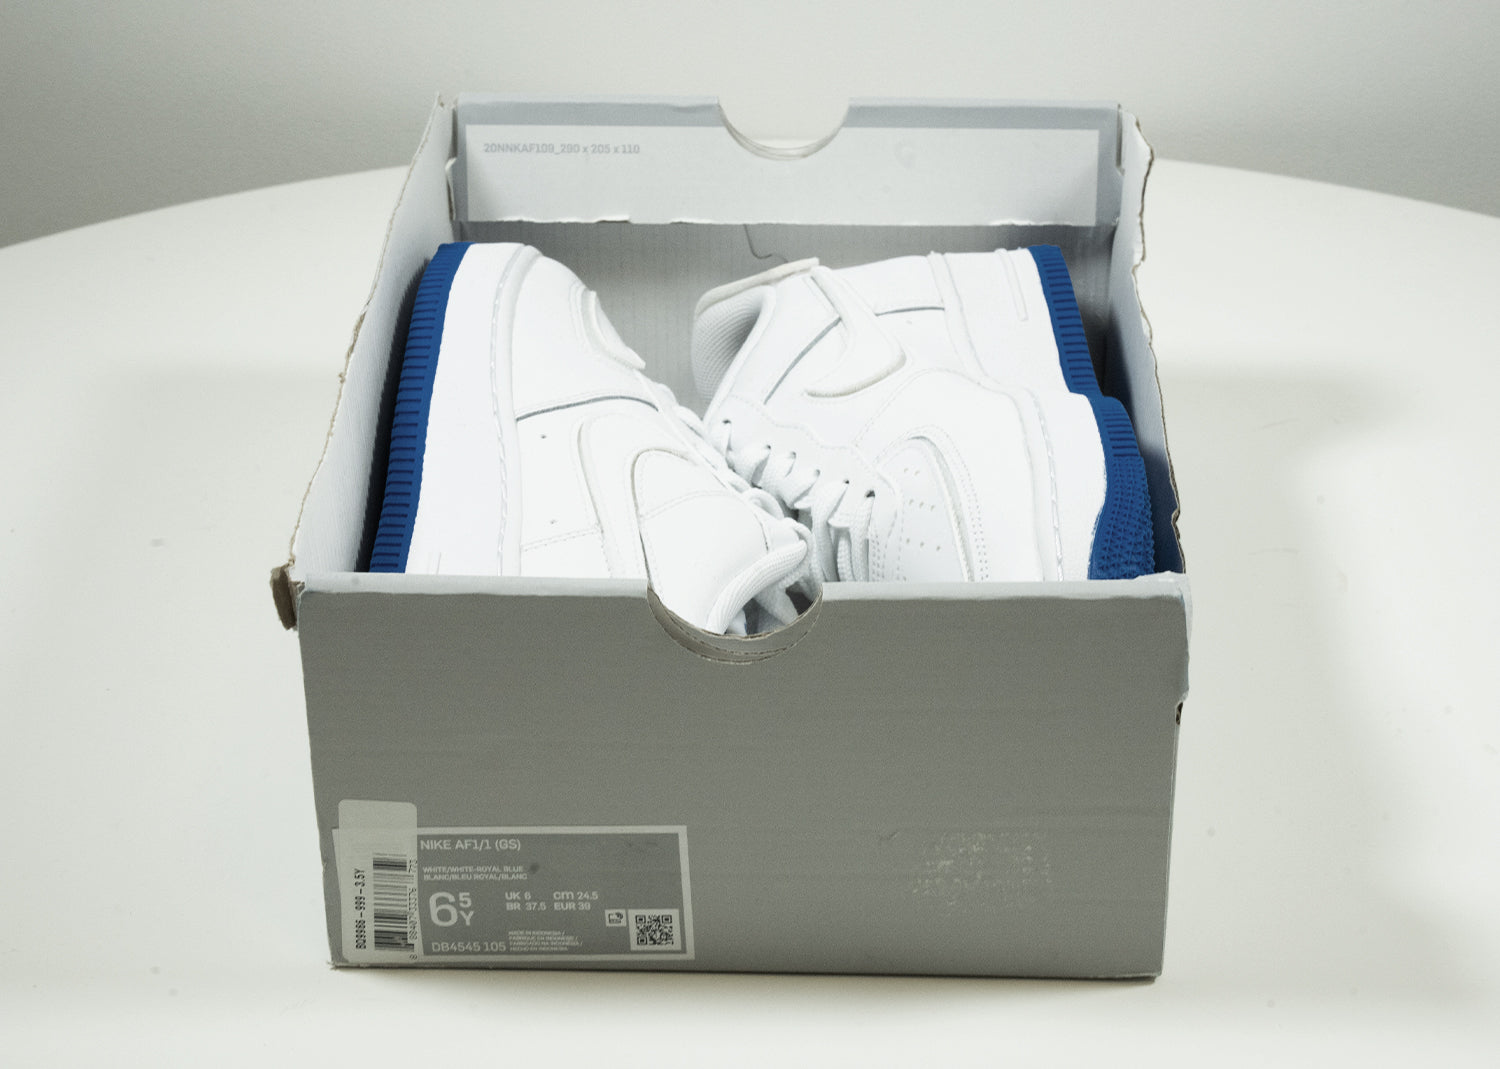 Second Chance - Multi Nike Air Force 1/1 White Royal Blue (GS) | NEW